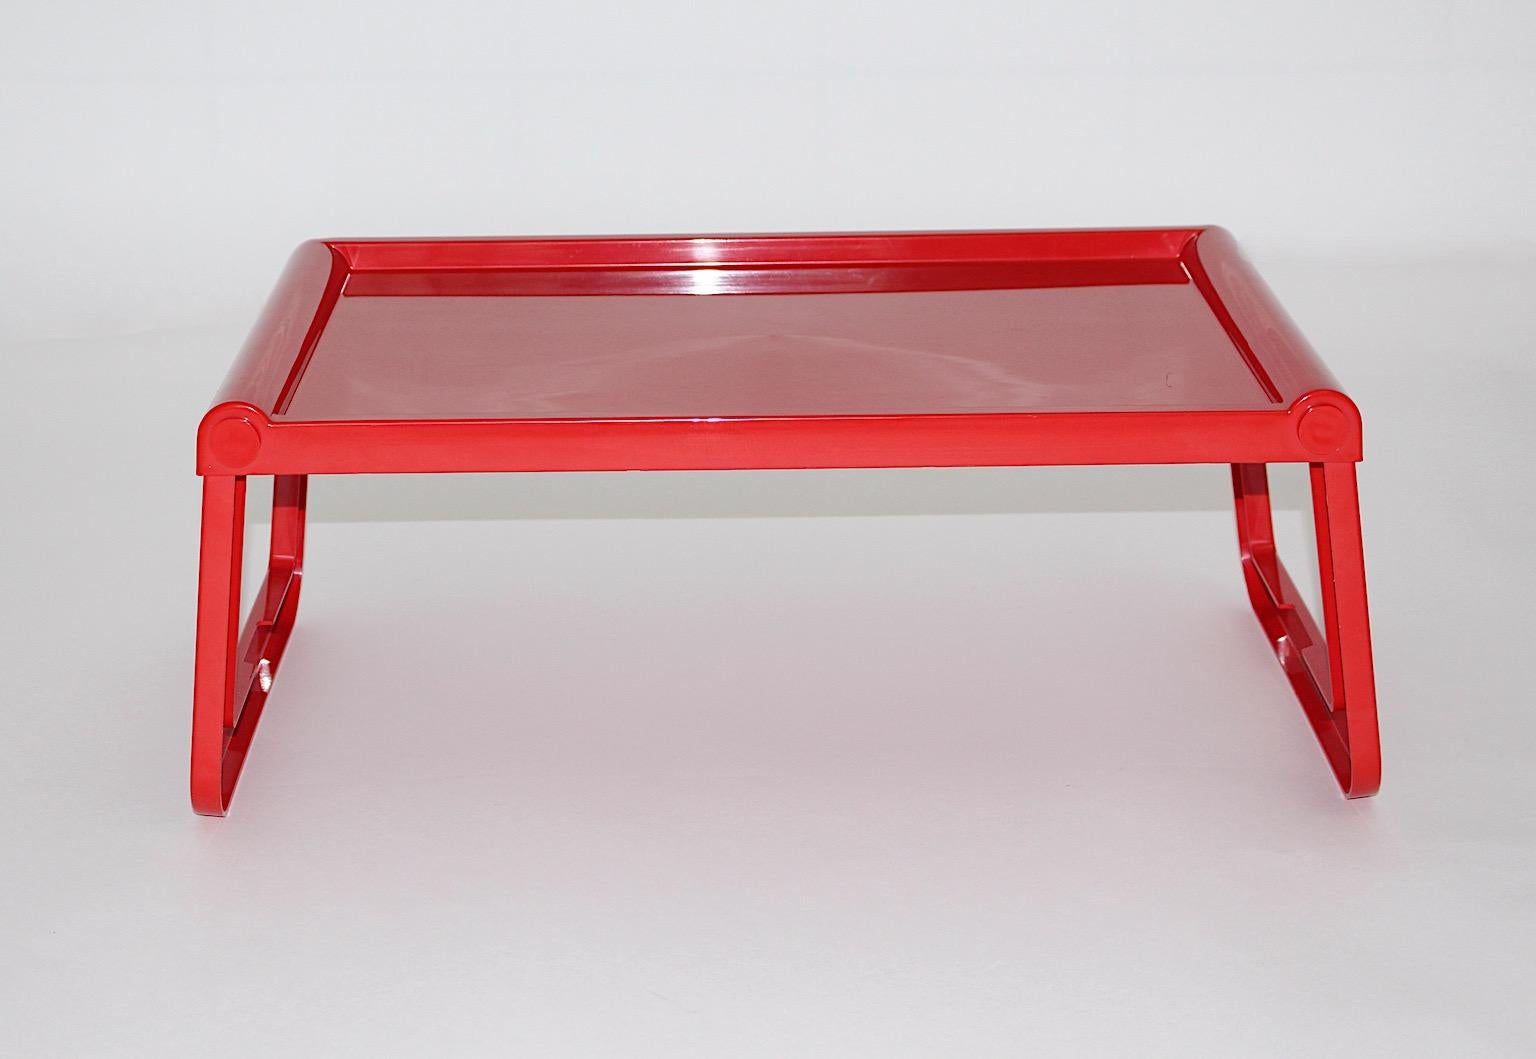 Space Age vintage plastic tray table or gueridon or foldable breakfast table model Pepito designed by Luigi Massoni 
Grafico Studio Zeto for Guzzini italy 1970s.
Very practical to use it as laptop table or breakfast table.
Made from red ABS